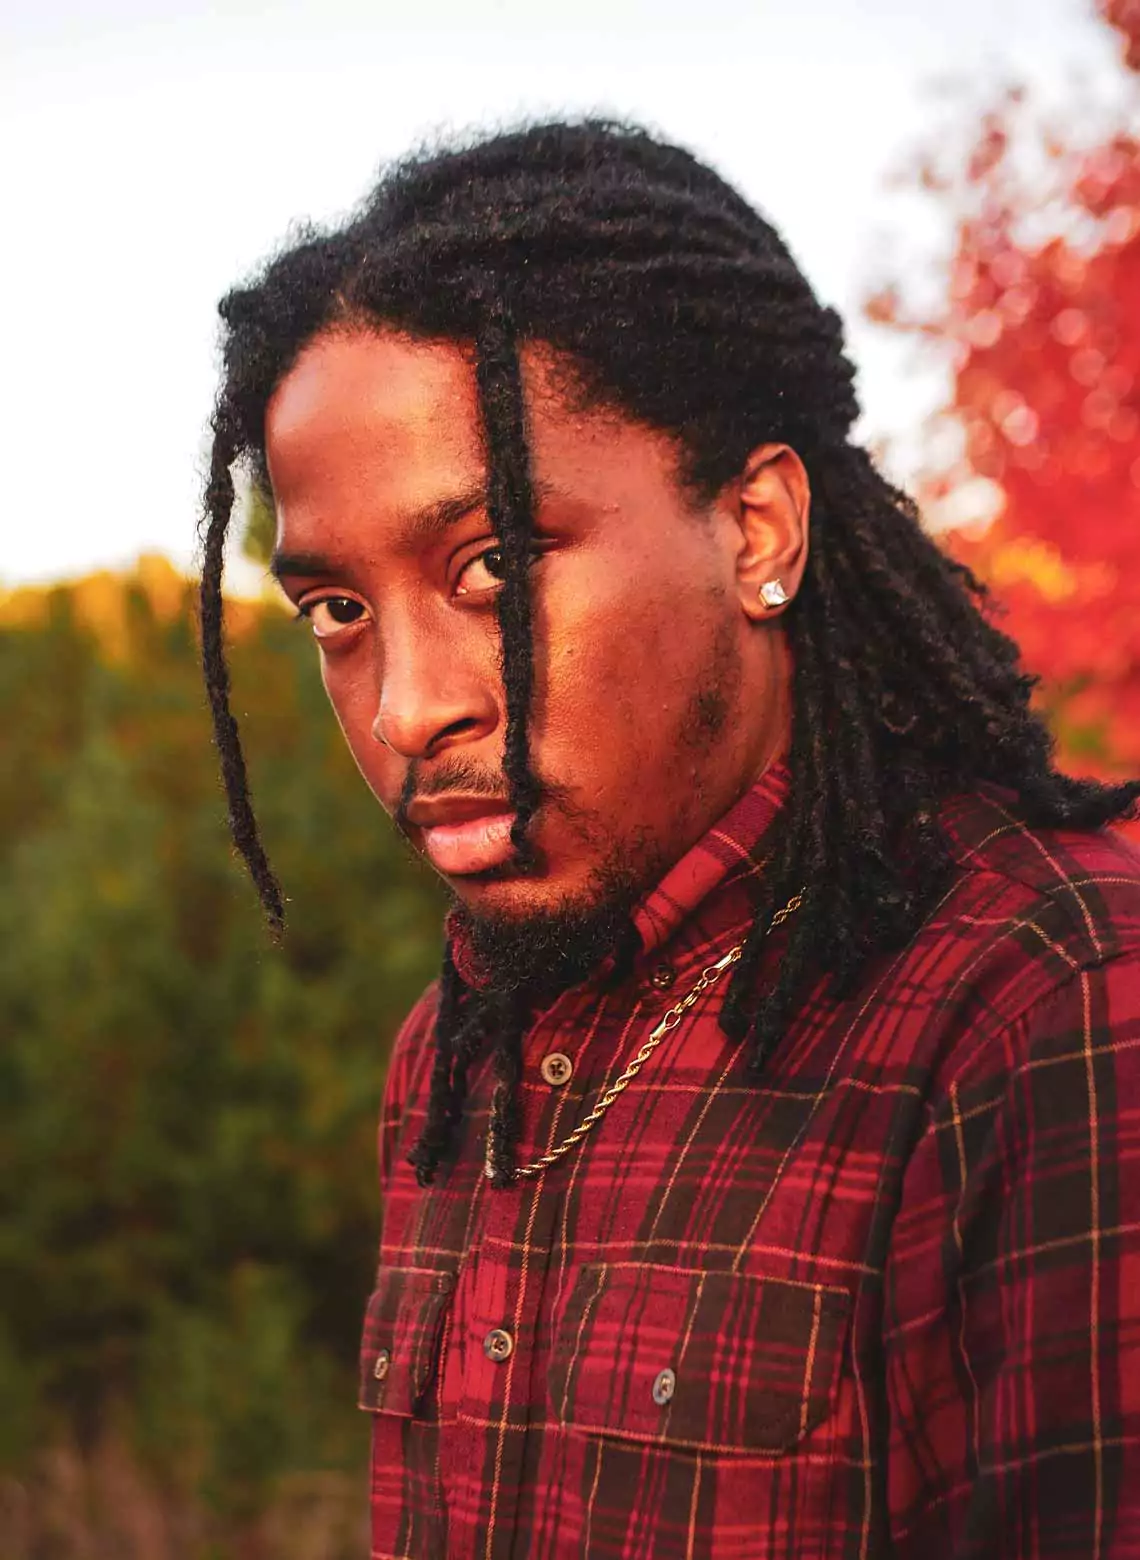 Image of man with locs in a half-up, half-down style. 